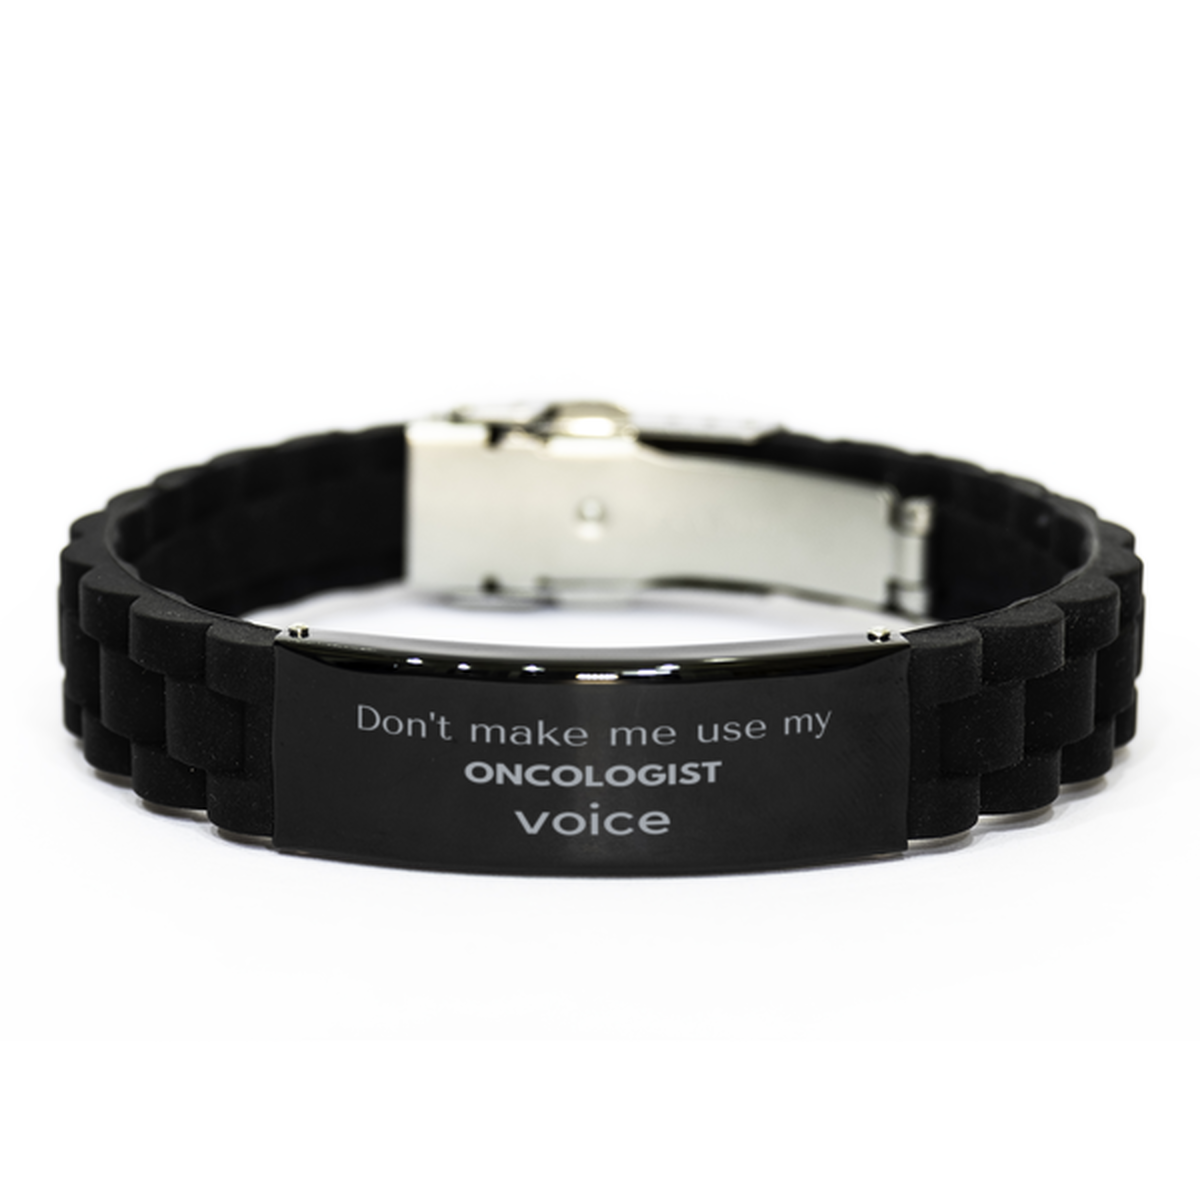 Don't make me use my Oncologist voice, Sarcasm Oncologist Gifts, Christmas Oncologist Black Glidelock Clasp Bracelet Birthday Unique Gifts For Oncologist Coworkers, Men, Women, Colleague, Friends